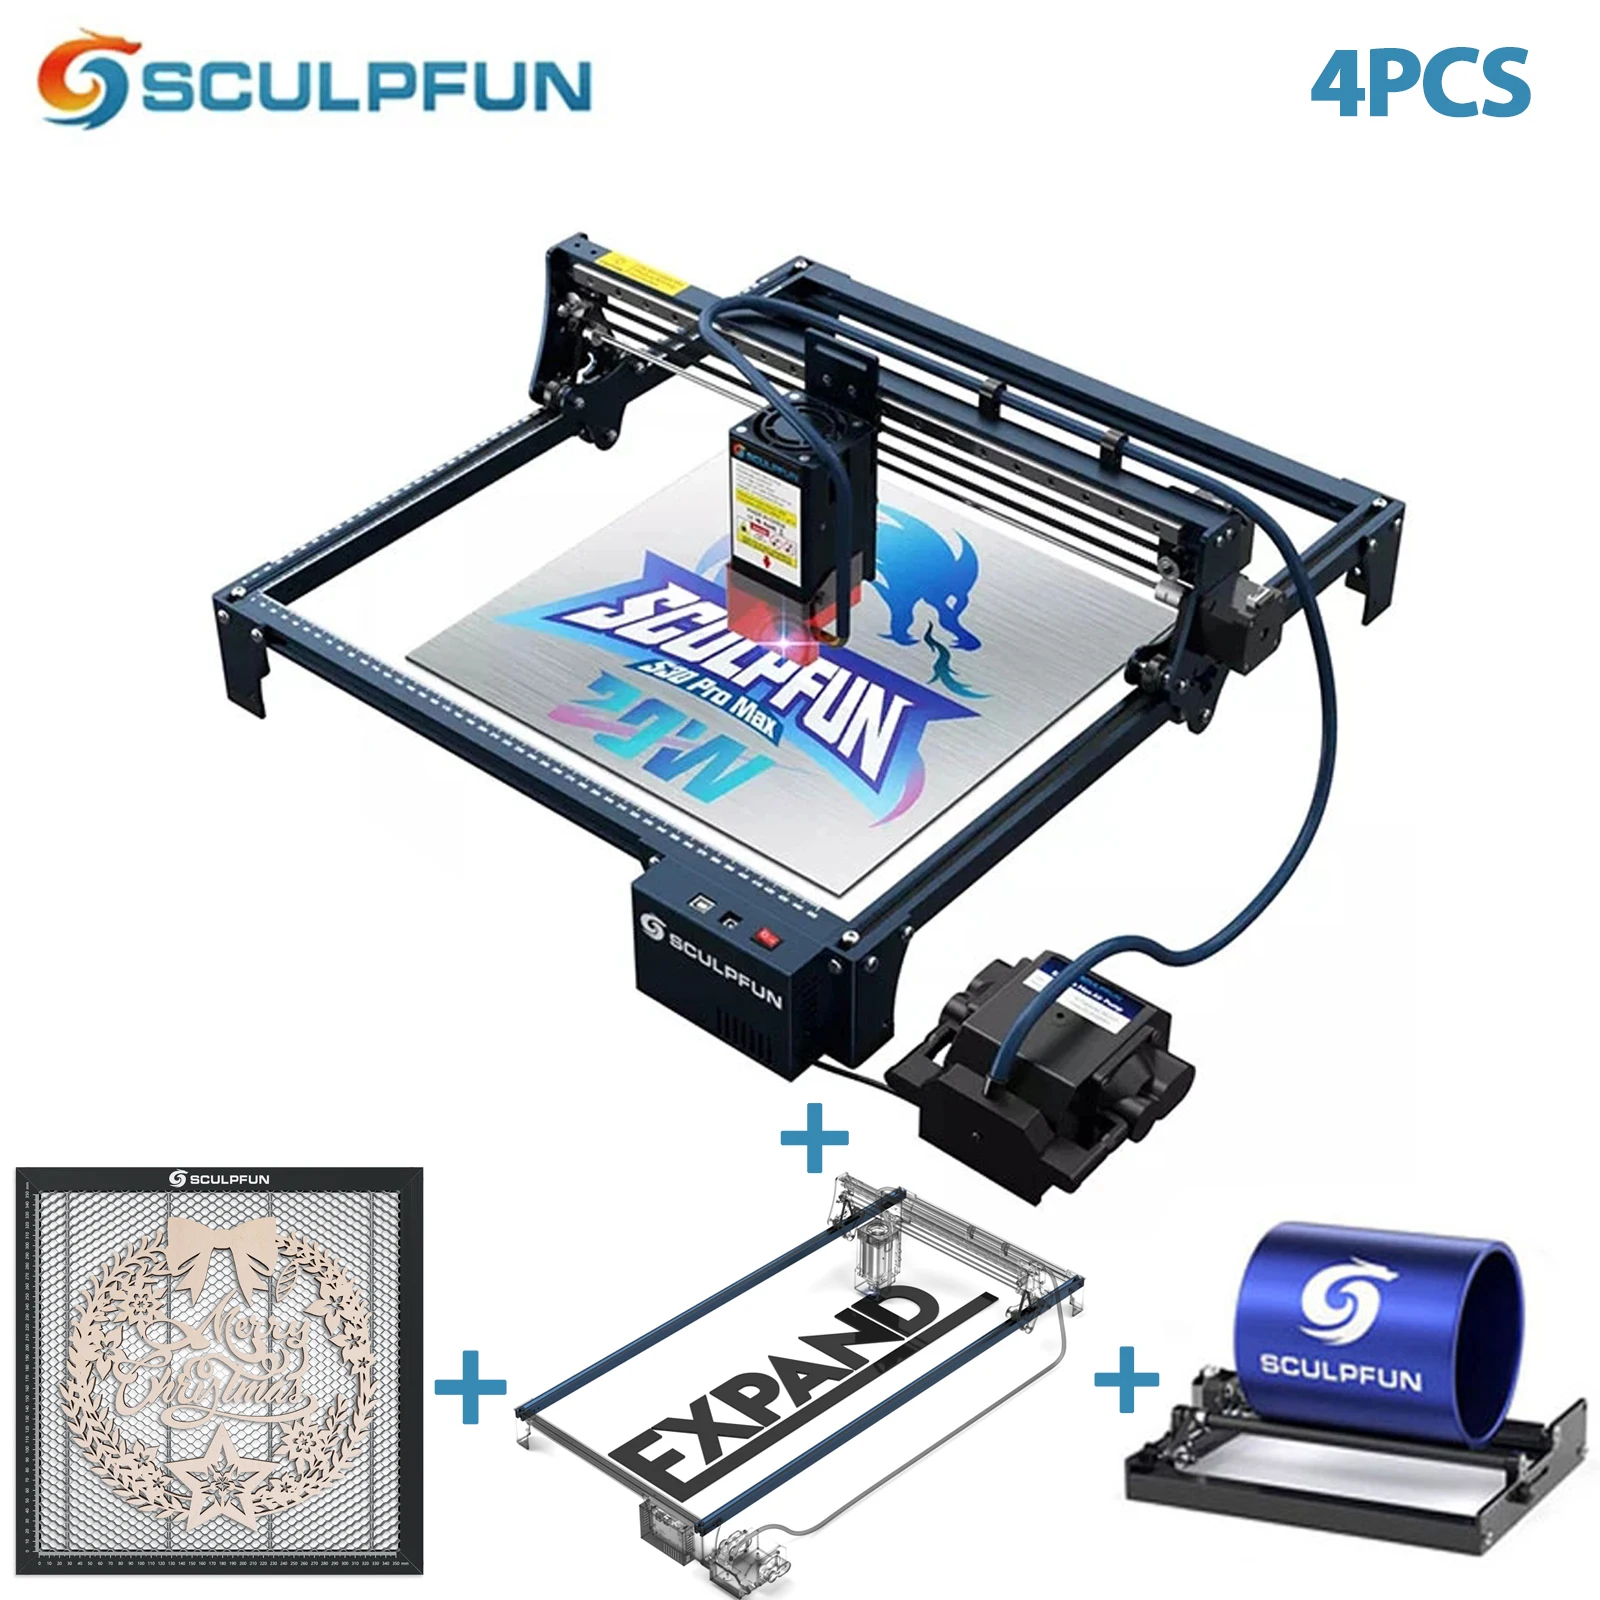 SCULPFUN S30 Pro Max Set Laser Engraver With Automatic Air-assist System 20W Engraving Machine Replaceable Lens Eye Protection sculpfun s30 ultra 22w laser engraving machine 600x600mm engraving area with automatic air assist replaceable lens